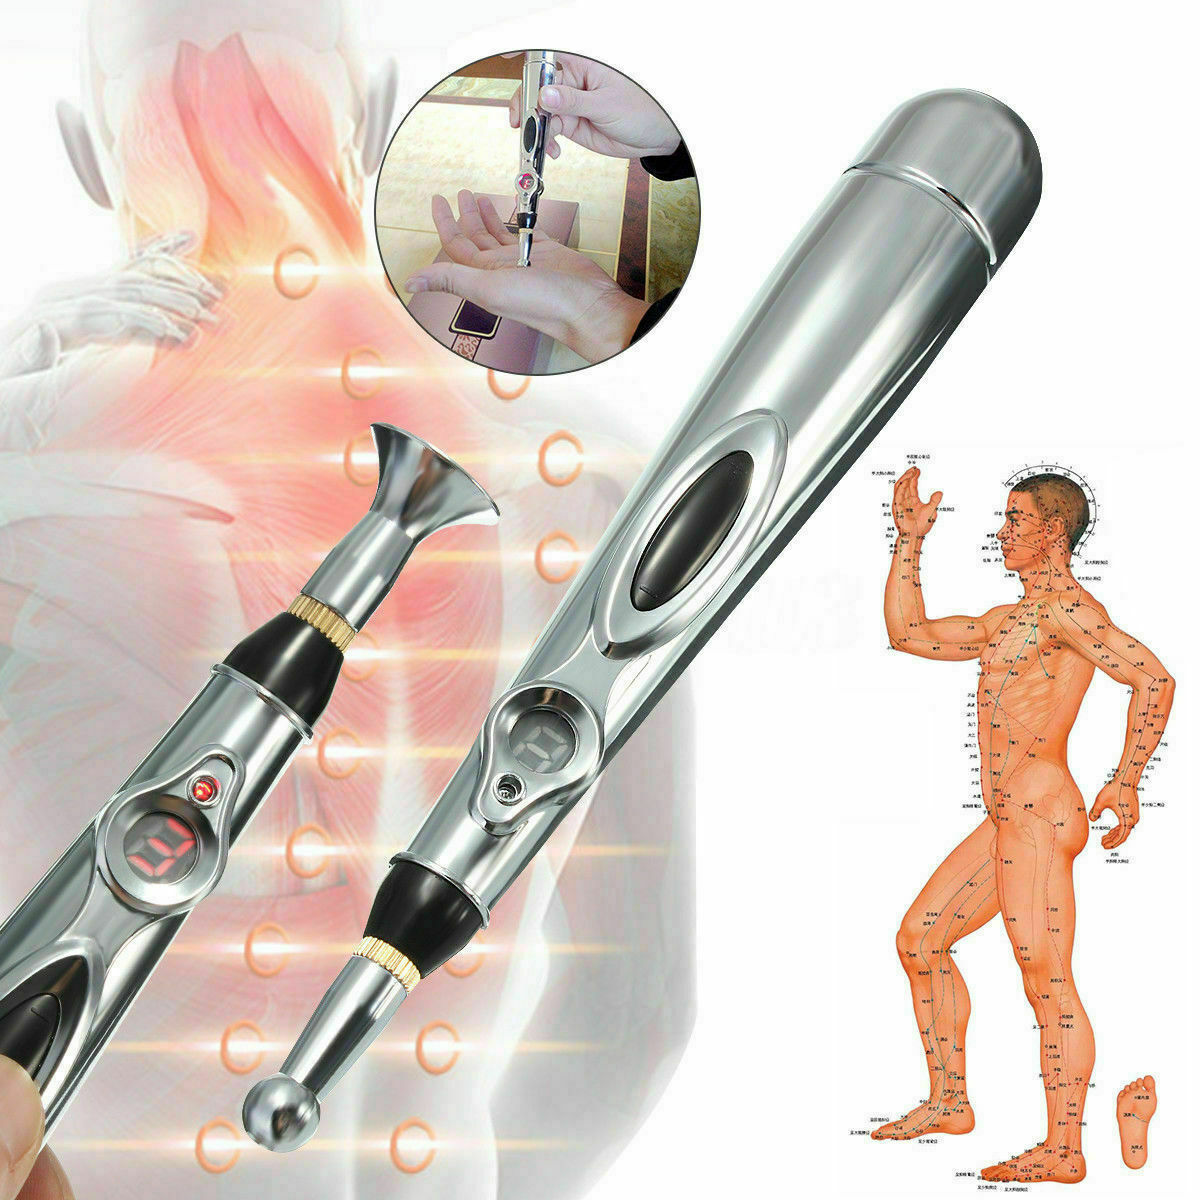 Image 81 - Therapy Acupuncture Electronic Pen Meridian Energy Heal Massage Pain Relief USA